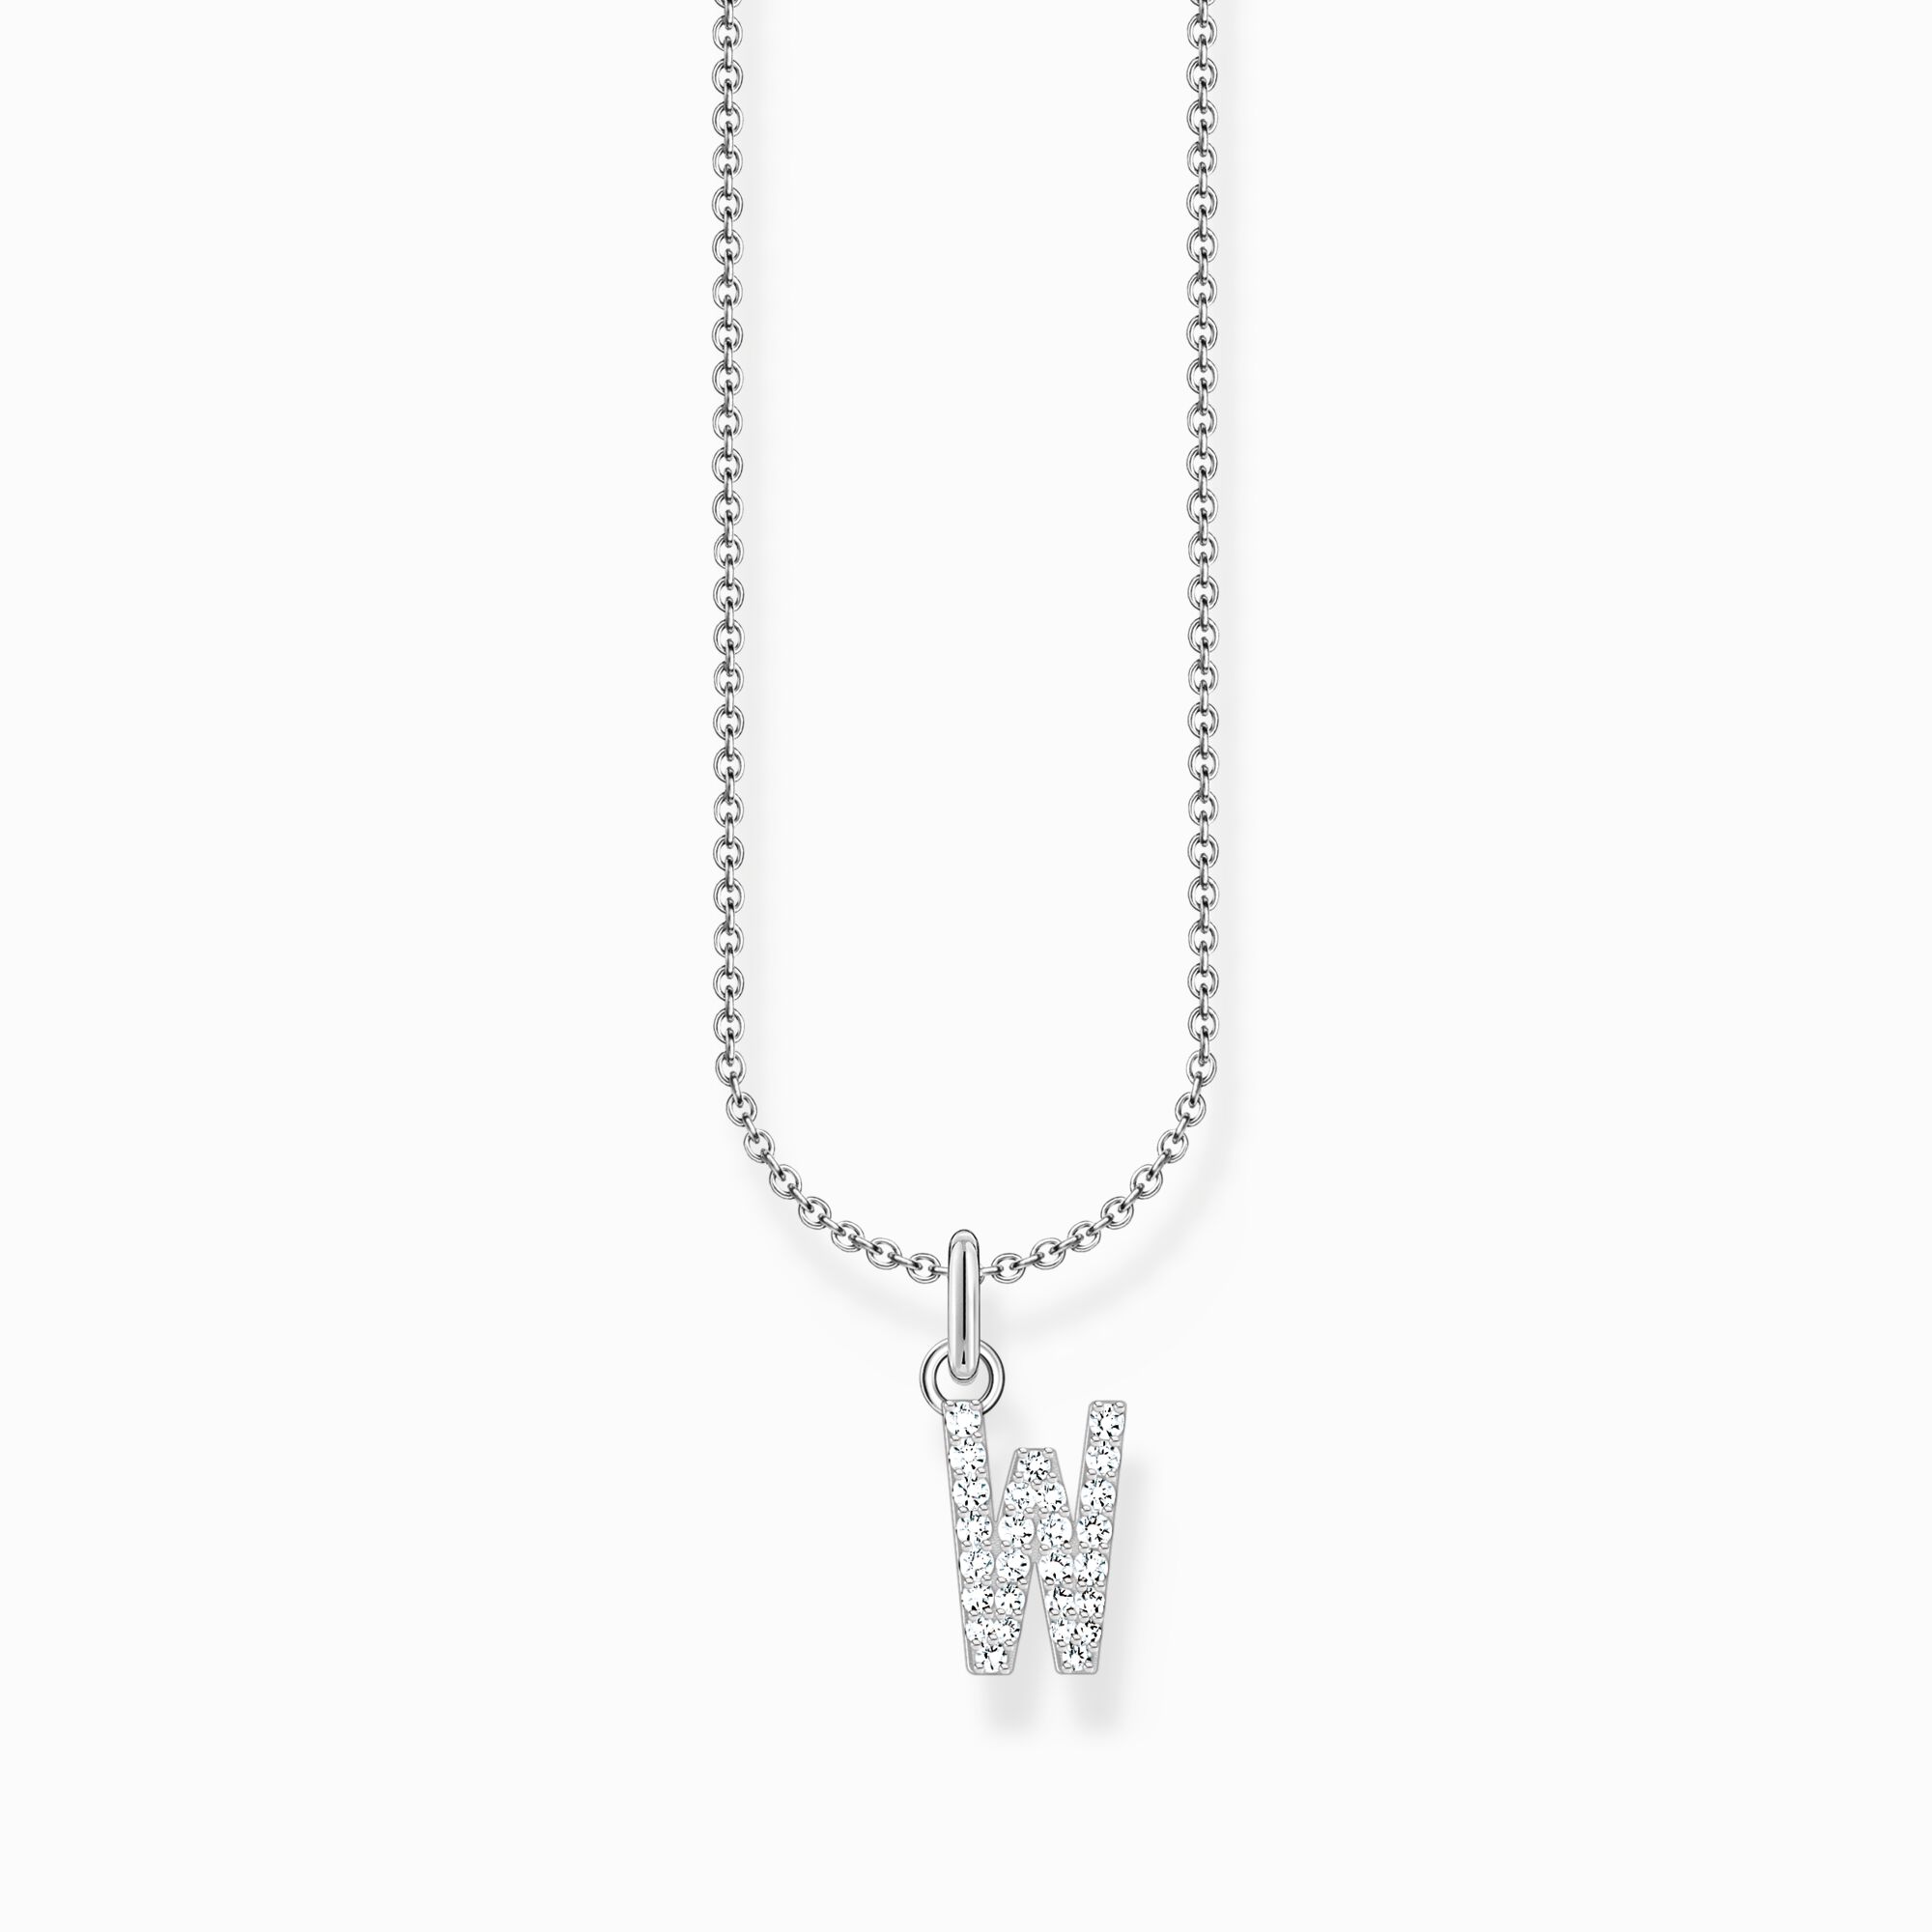 Silver necklace with letter pendant W and white zirconia from the Charming Collection collection in the THOMAS SABO online store